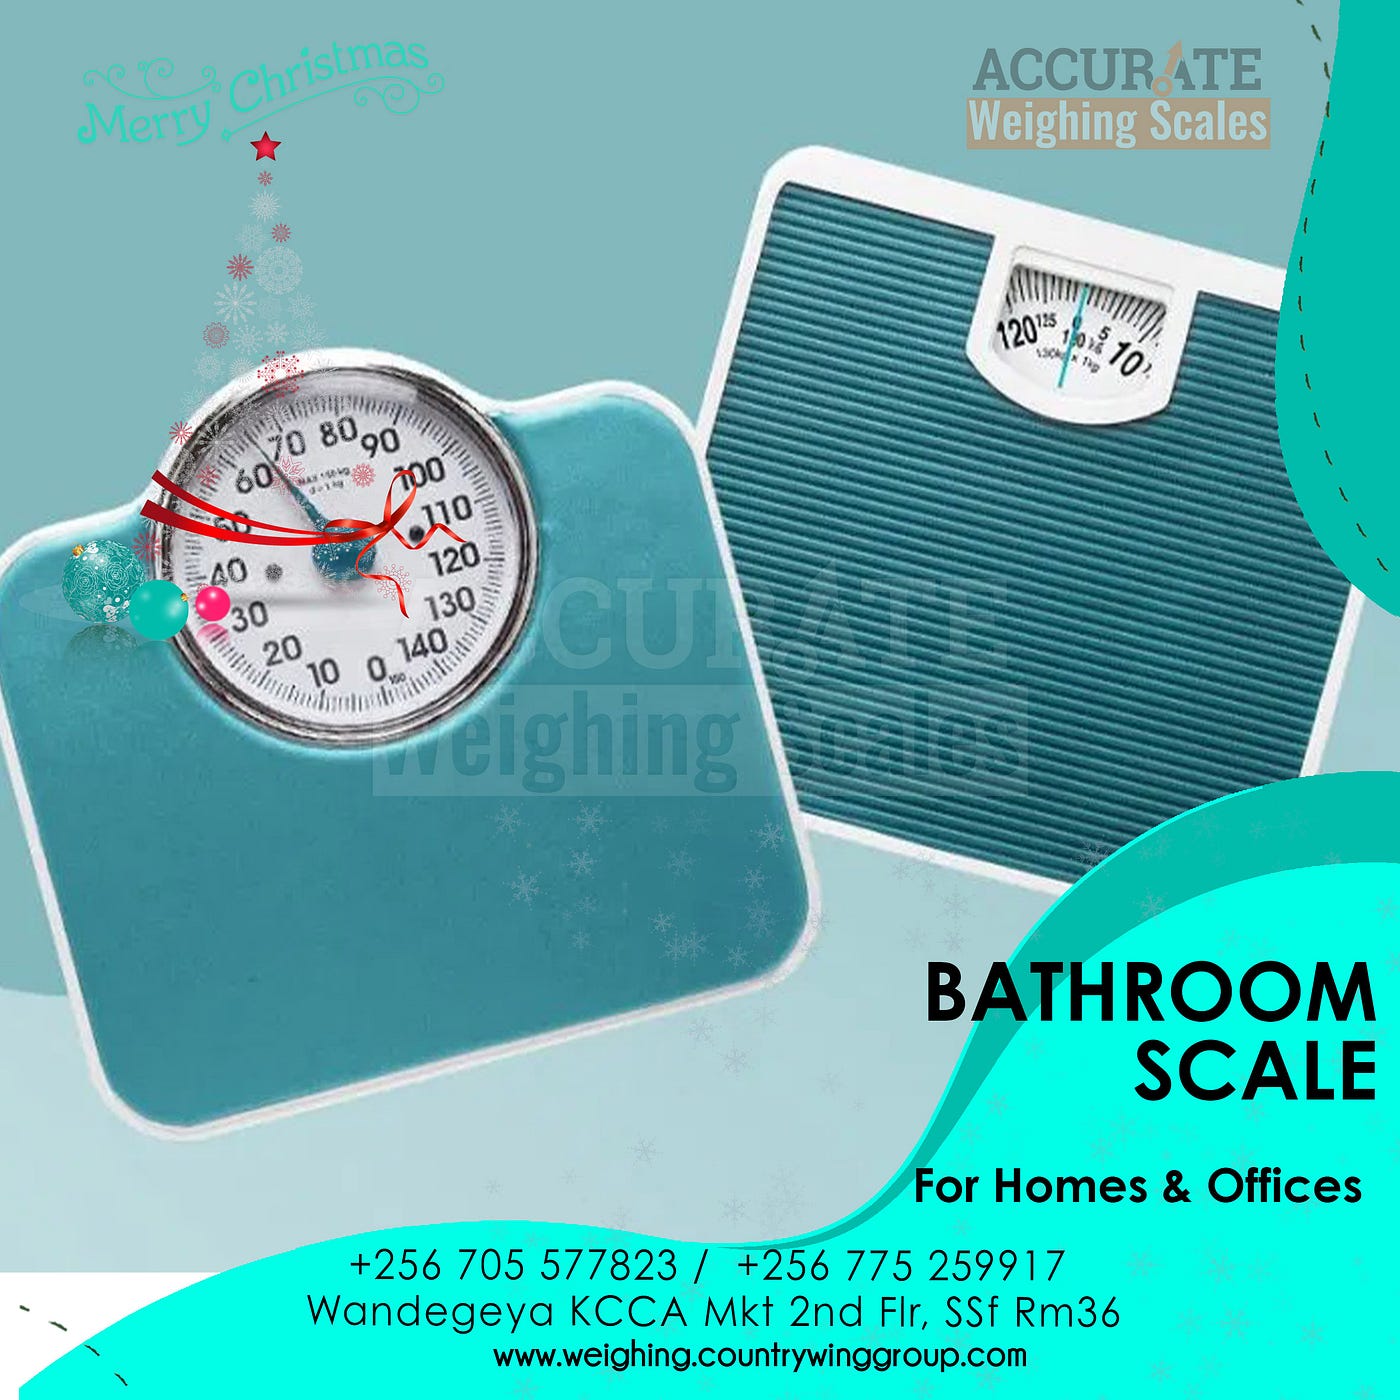 Where can find body weight weighing scale suppliers in Wandegeya Uganda?